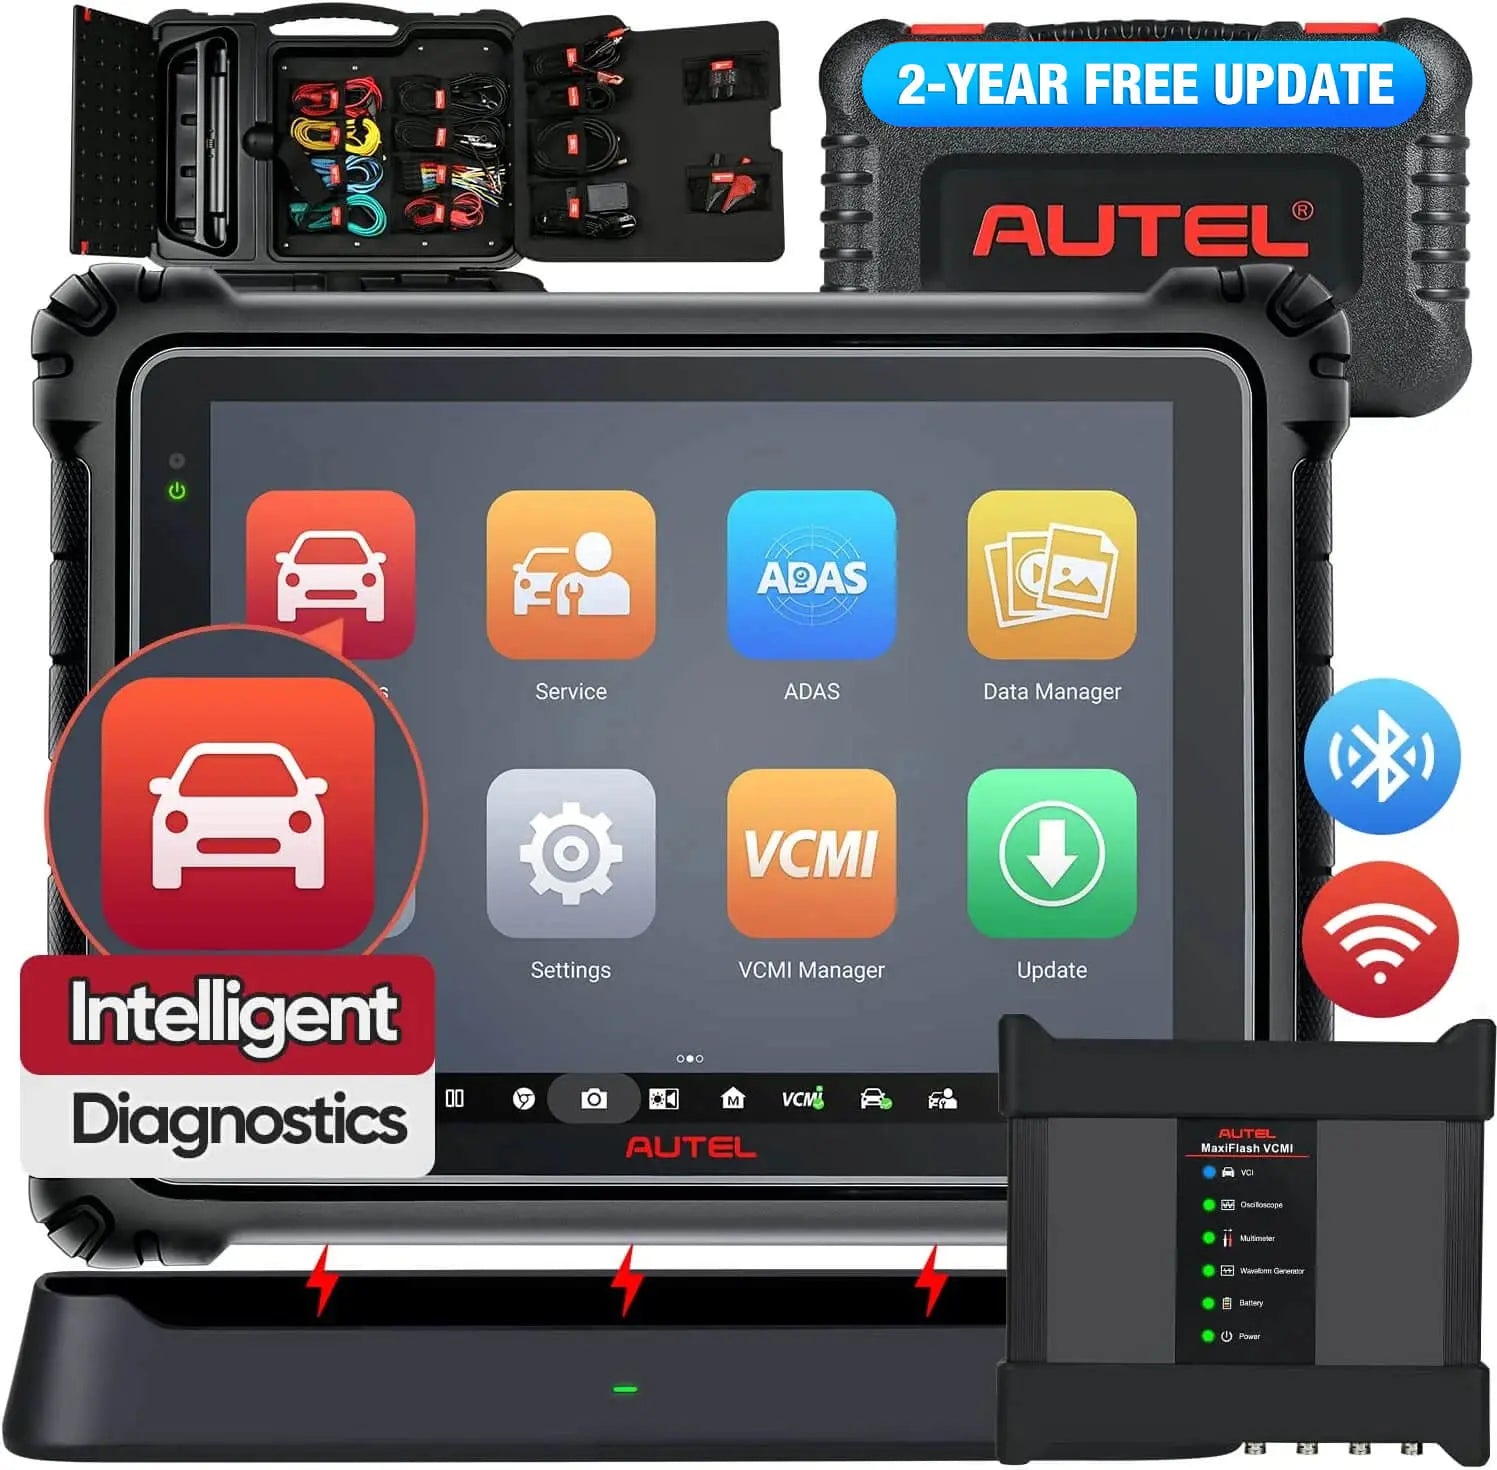 Autel Scanner MaxiSys Ultra, Top Car Intelligent Diagnostic Scan Tool –  Autel Global Store